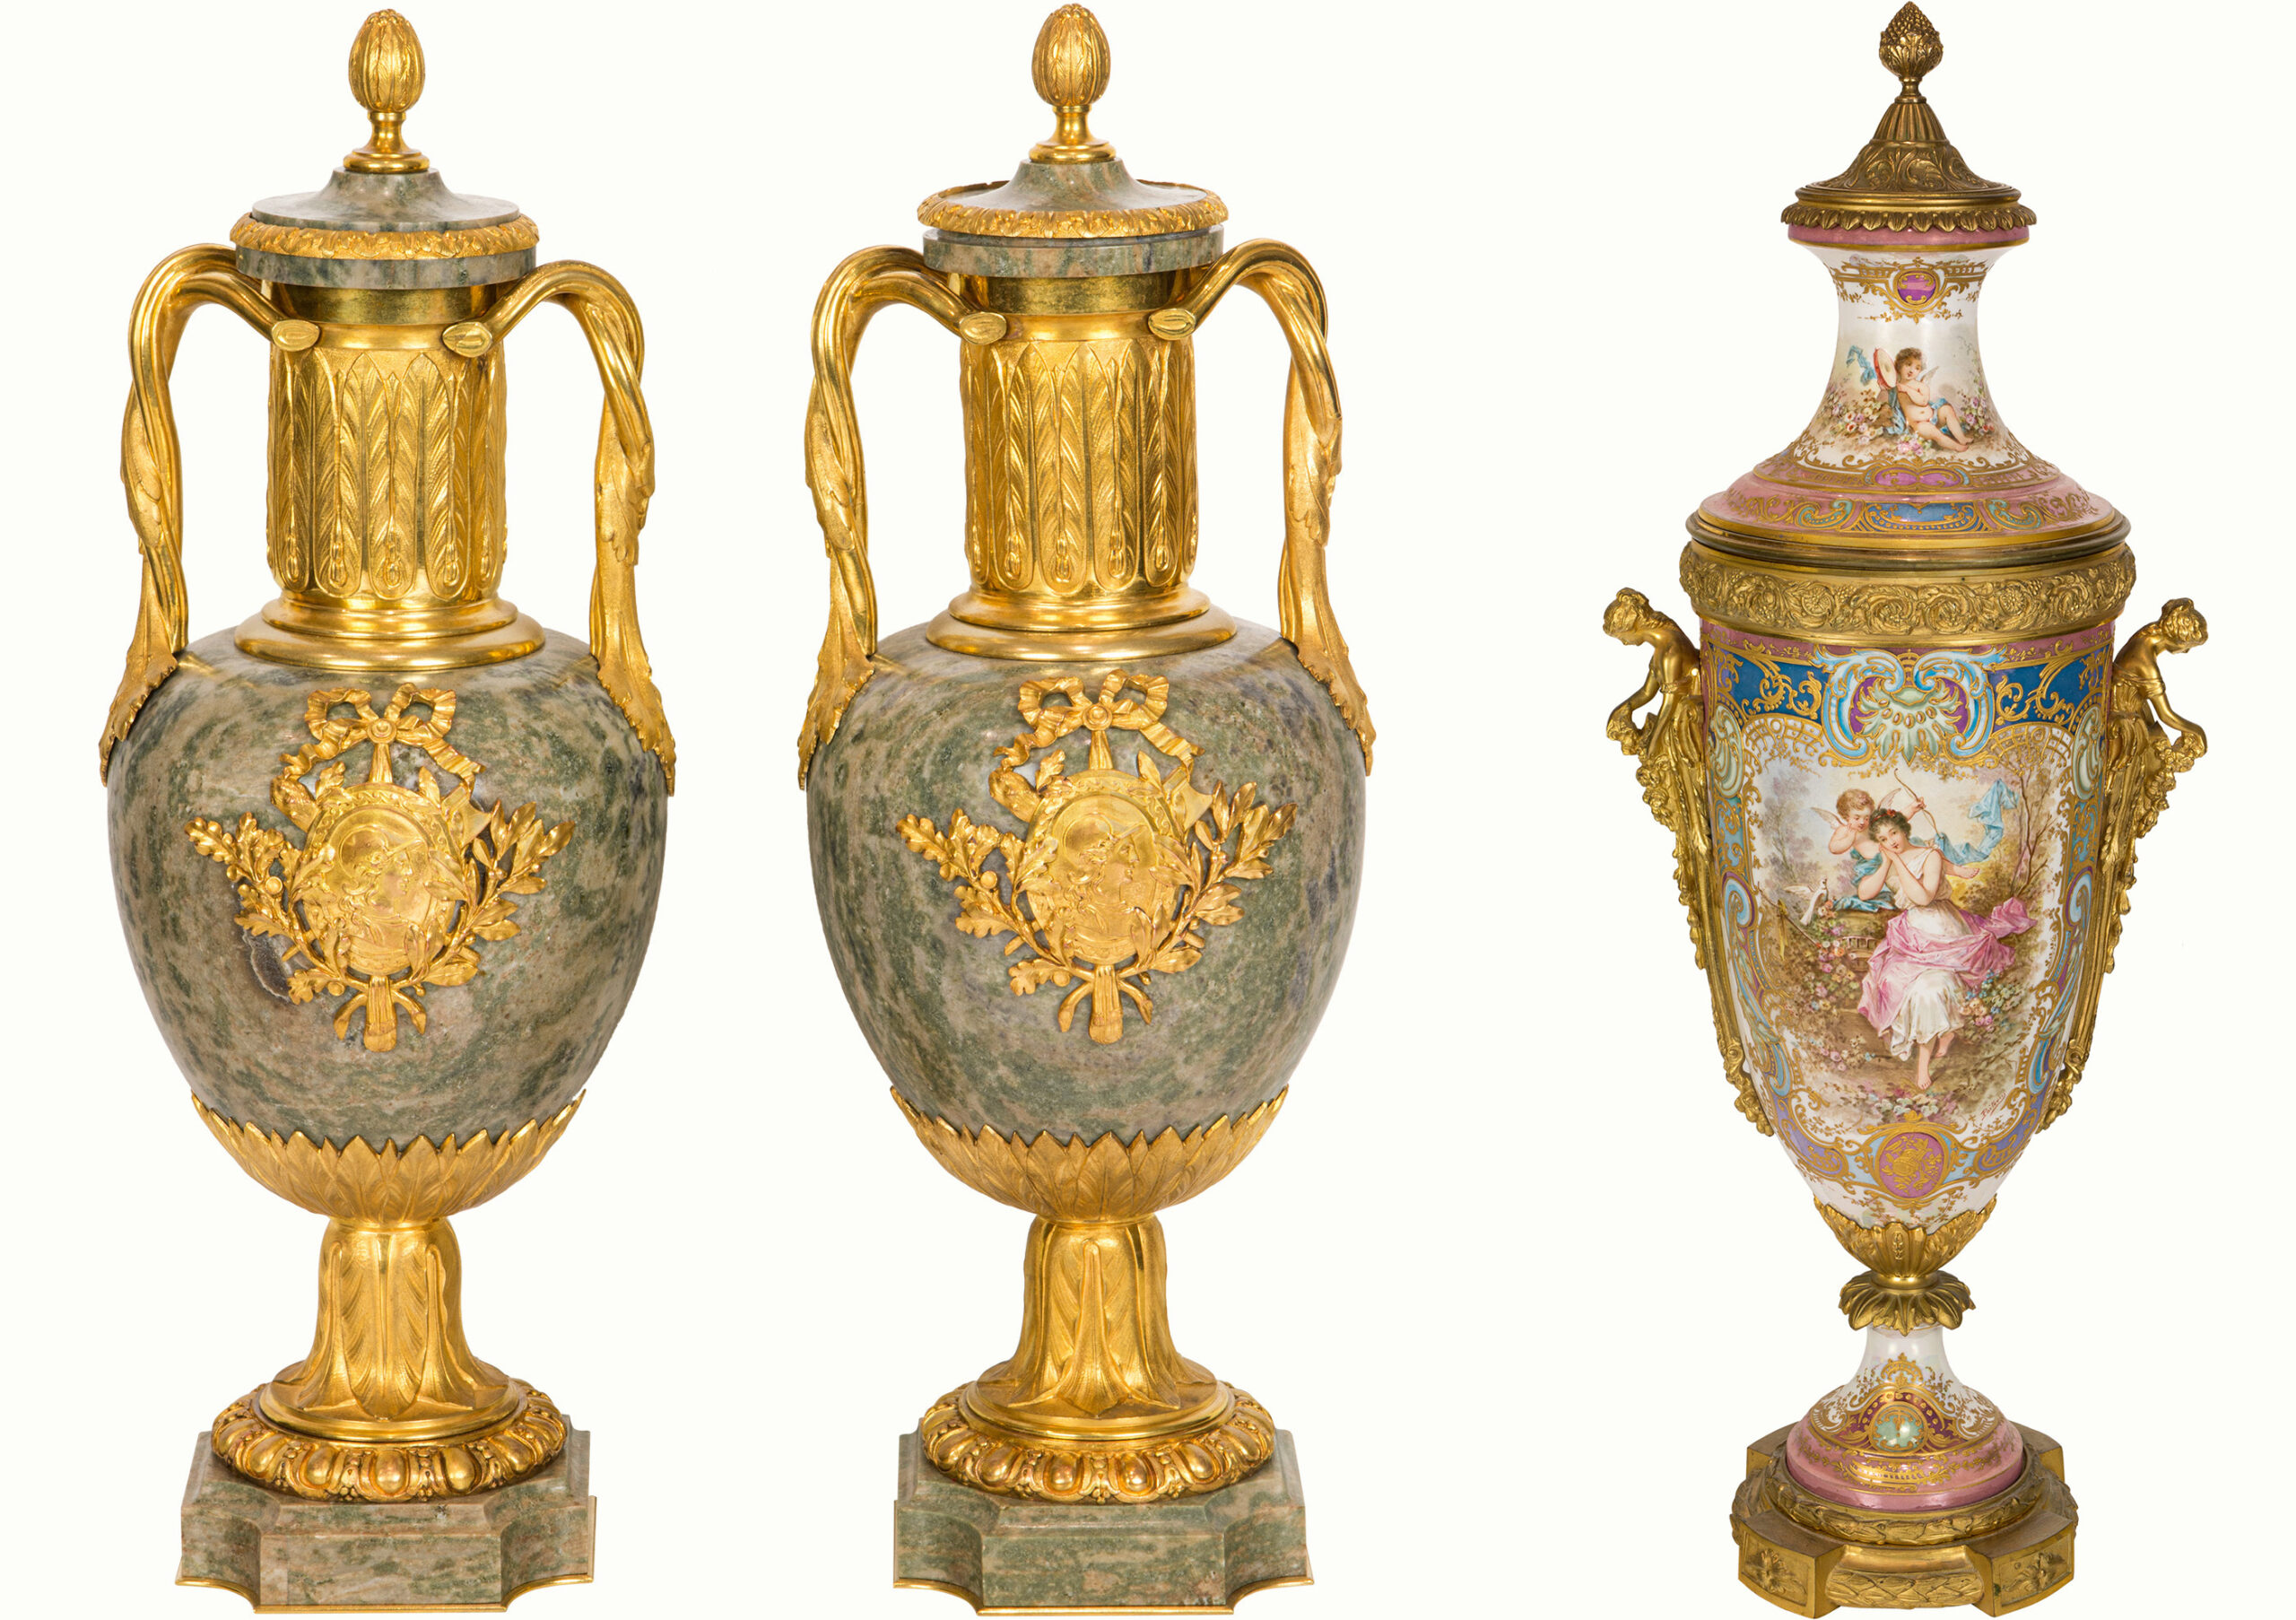 Left: A fine pair of Louis XVI style gilt bronze mounted marble urns by Susse Frères Foundry. Estimate: $1,800–$2,500 Right: An impressive Sèvres style luster and gilt decorated gilt bronze mounted porcelain covered urn, late 19th/early 20th century.